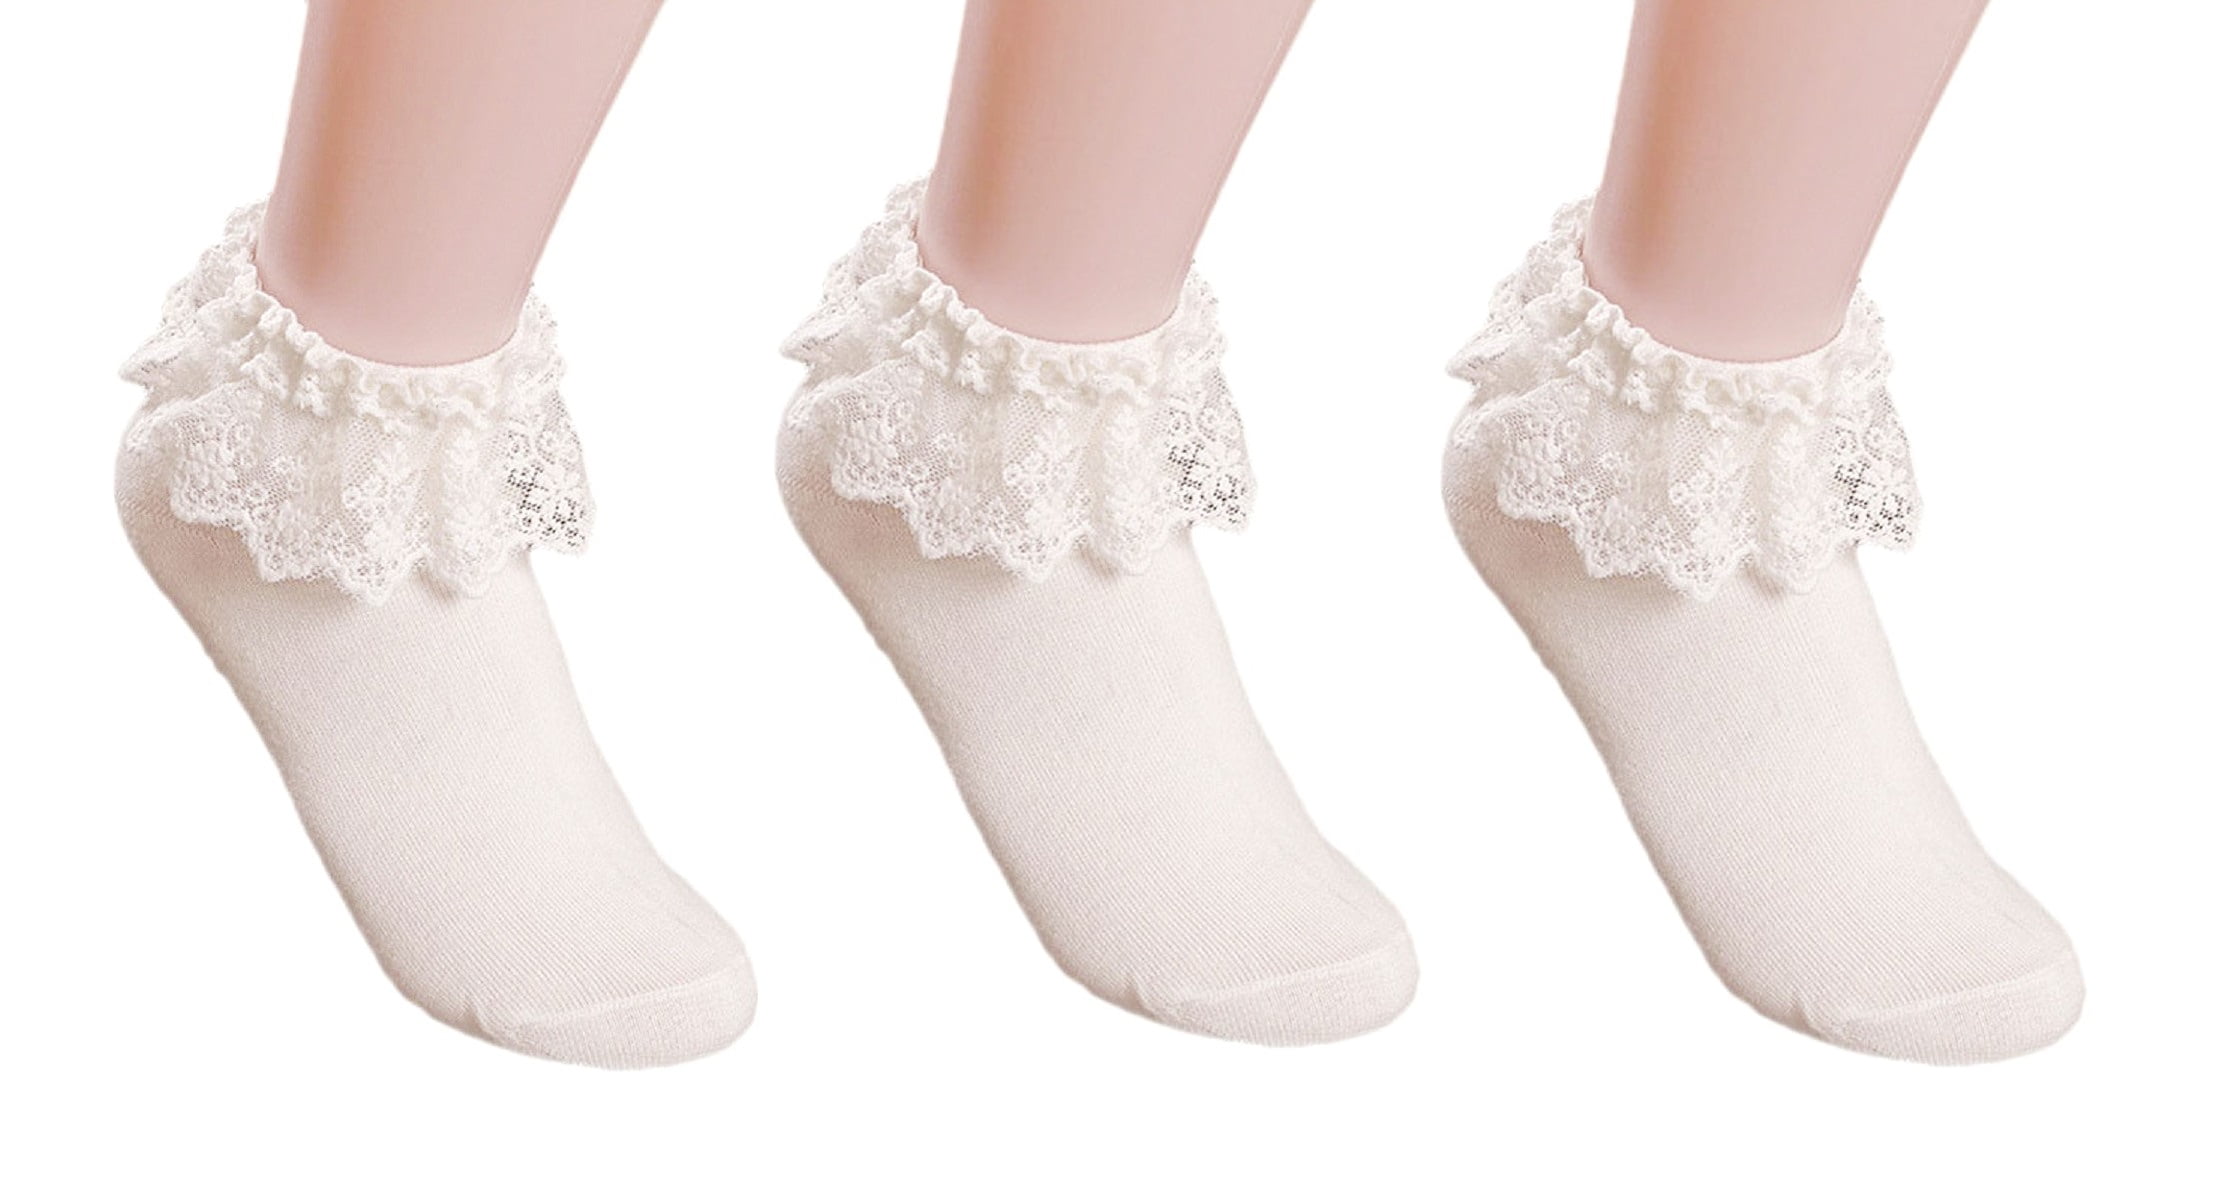 6 or 12 Pairs GIRLS SCHOOL COTTON LACE SOCKS FRILLY LACE ANKLE SOCKS ALL SIZES 